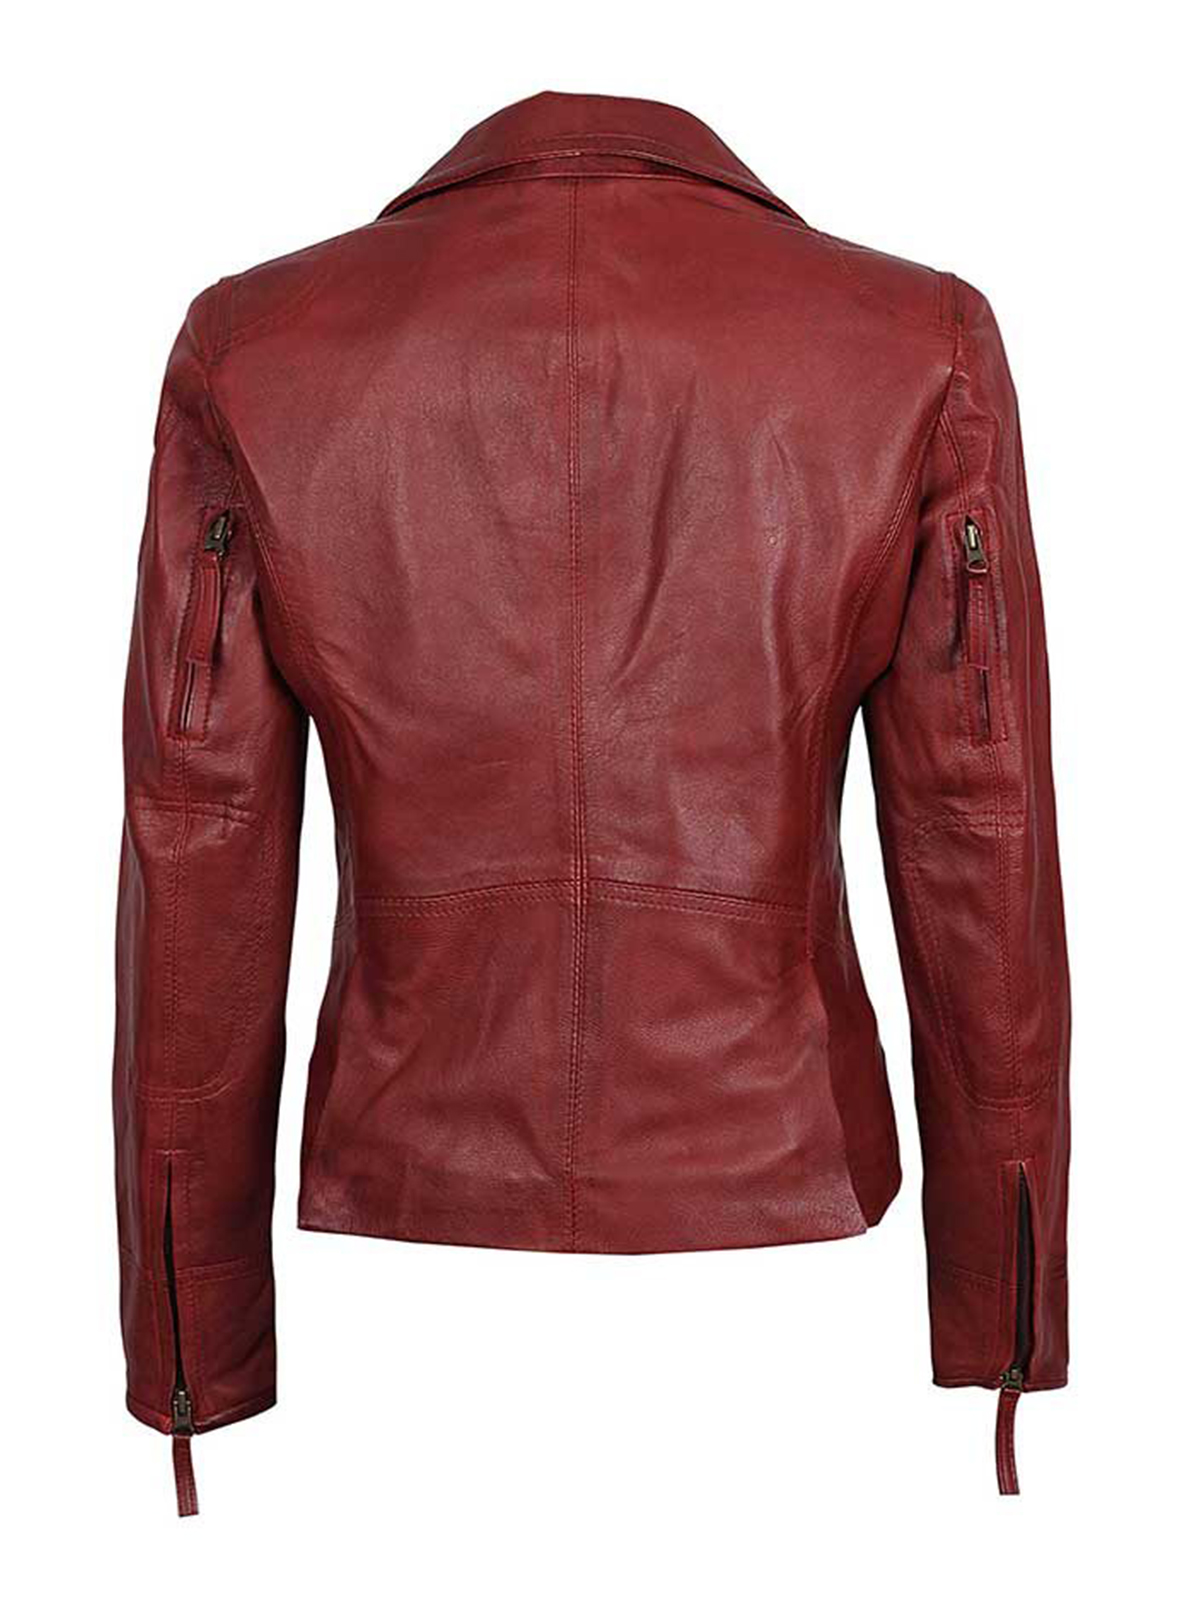 Girls Fitted Rust Leather Double Zippered Perfecto Jacket